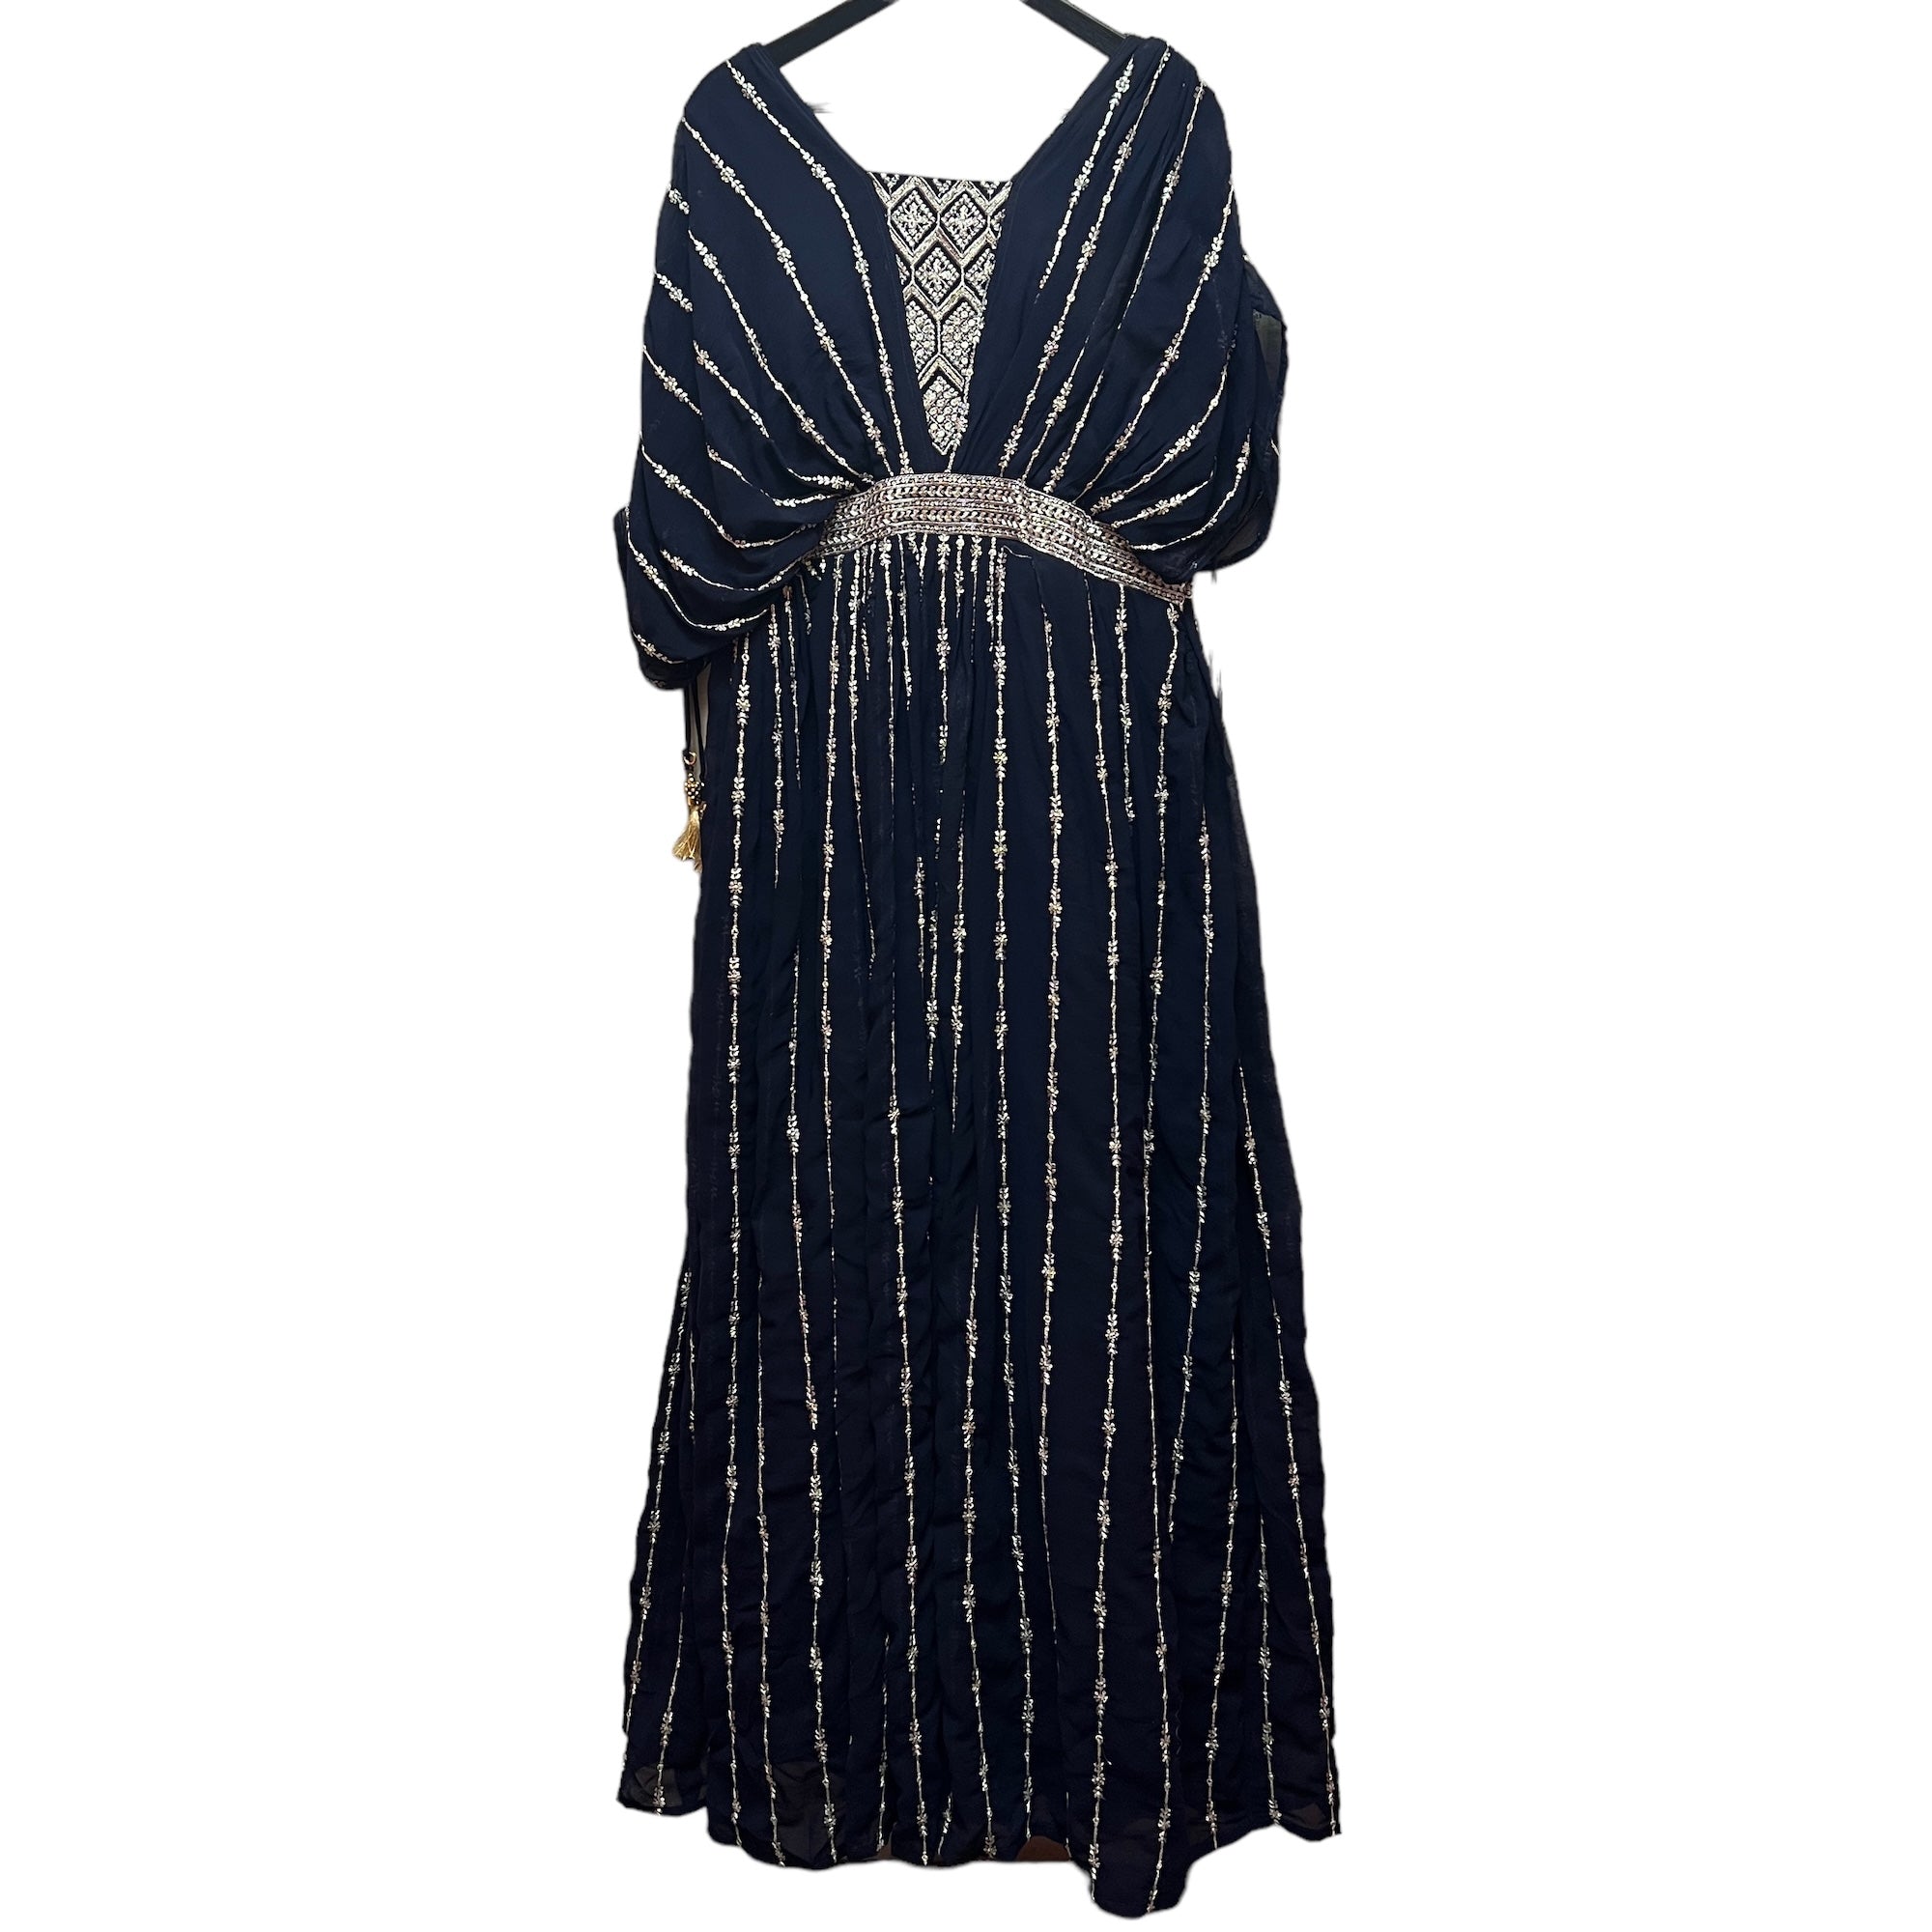 Navy Goddess Gown - Vintage India NYC